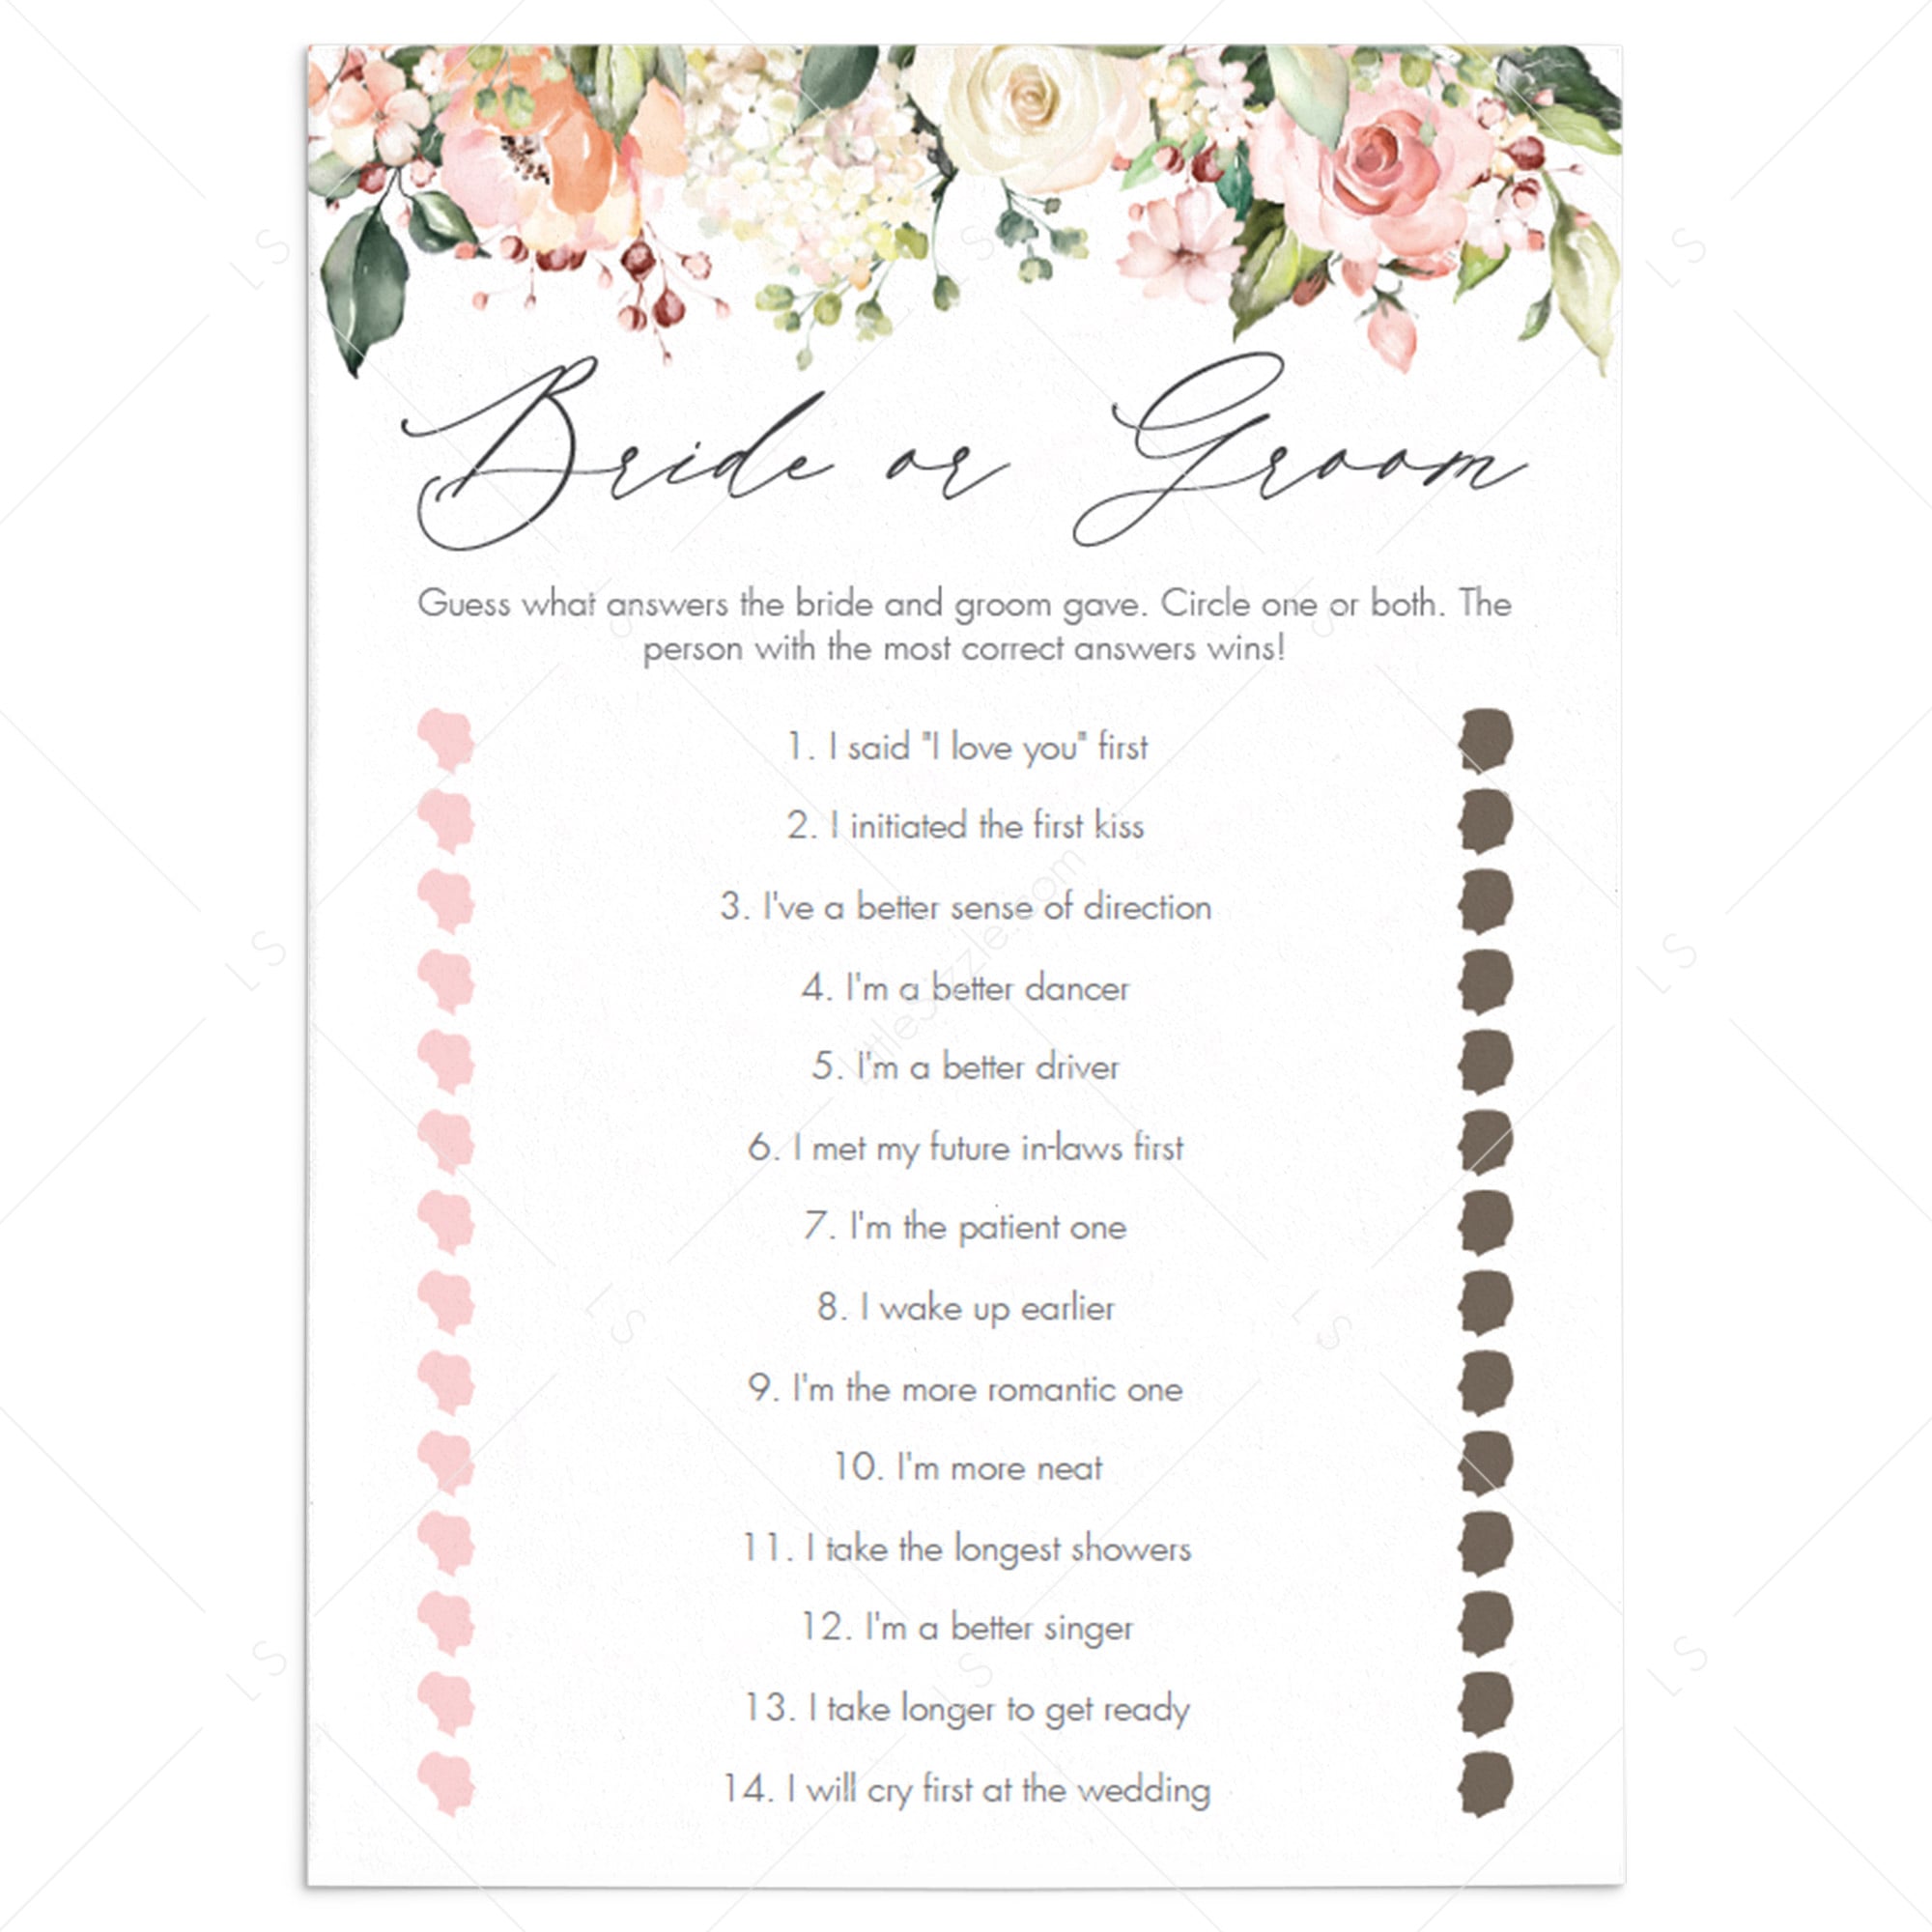 editable bride or groom bridal shower game templates by LittleSizzle